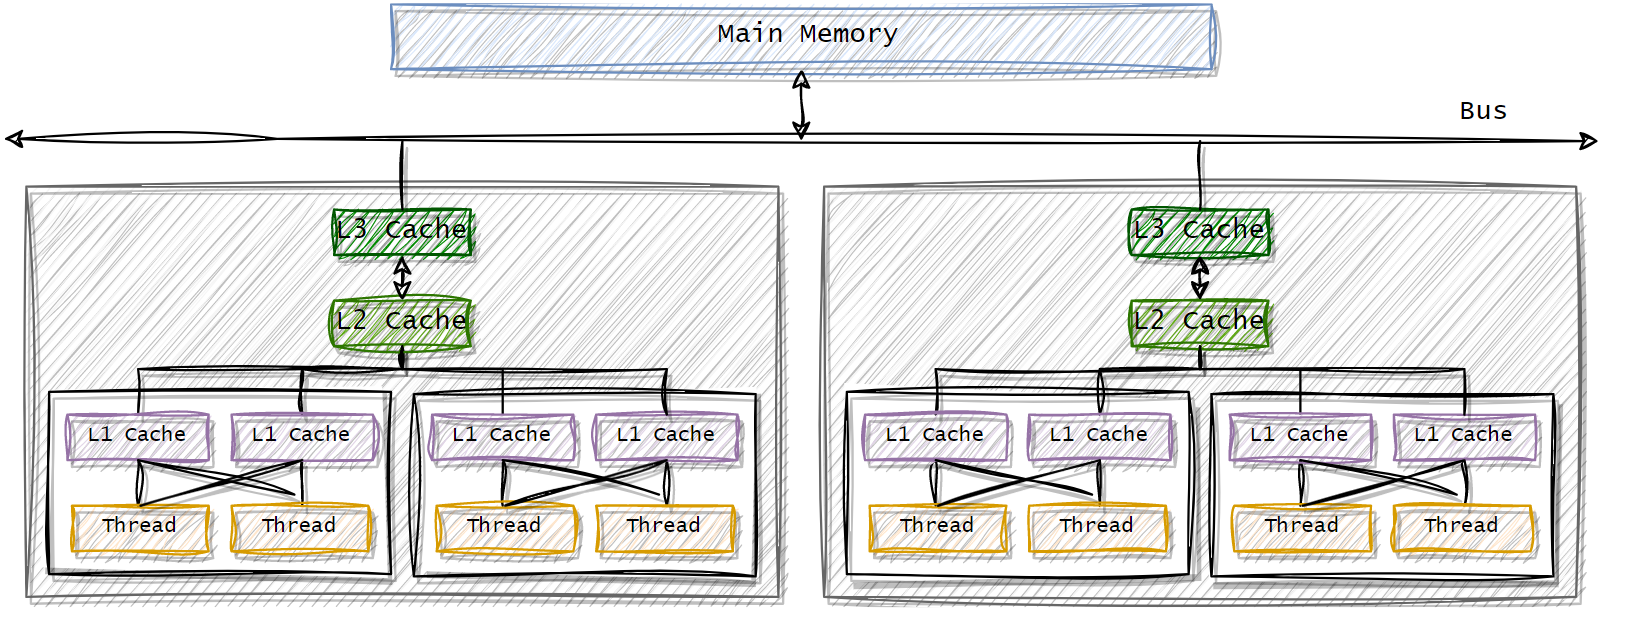 Multi-processor architecture from What every programmer should know about memory